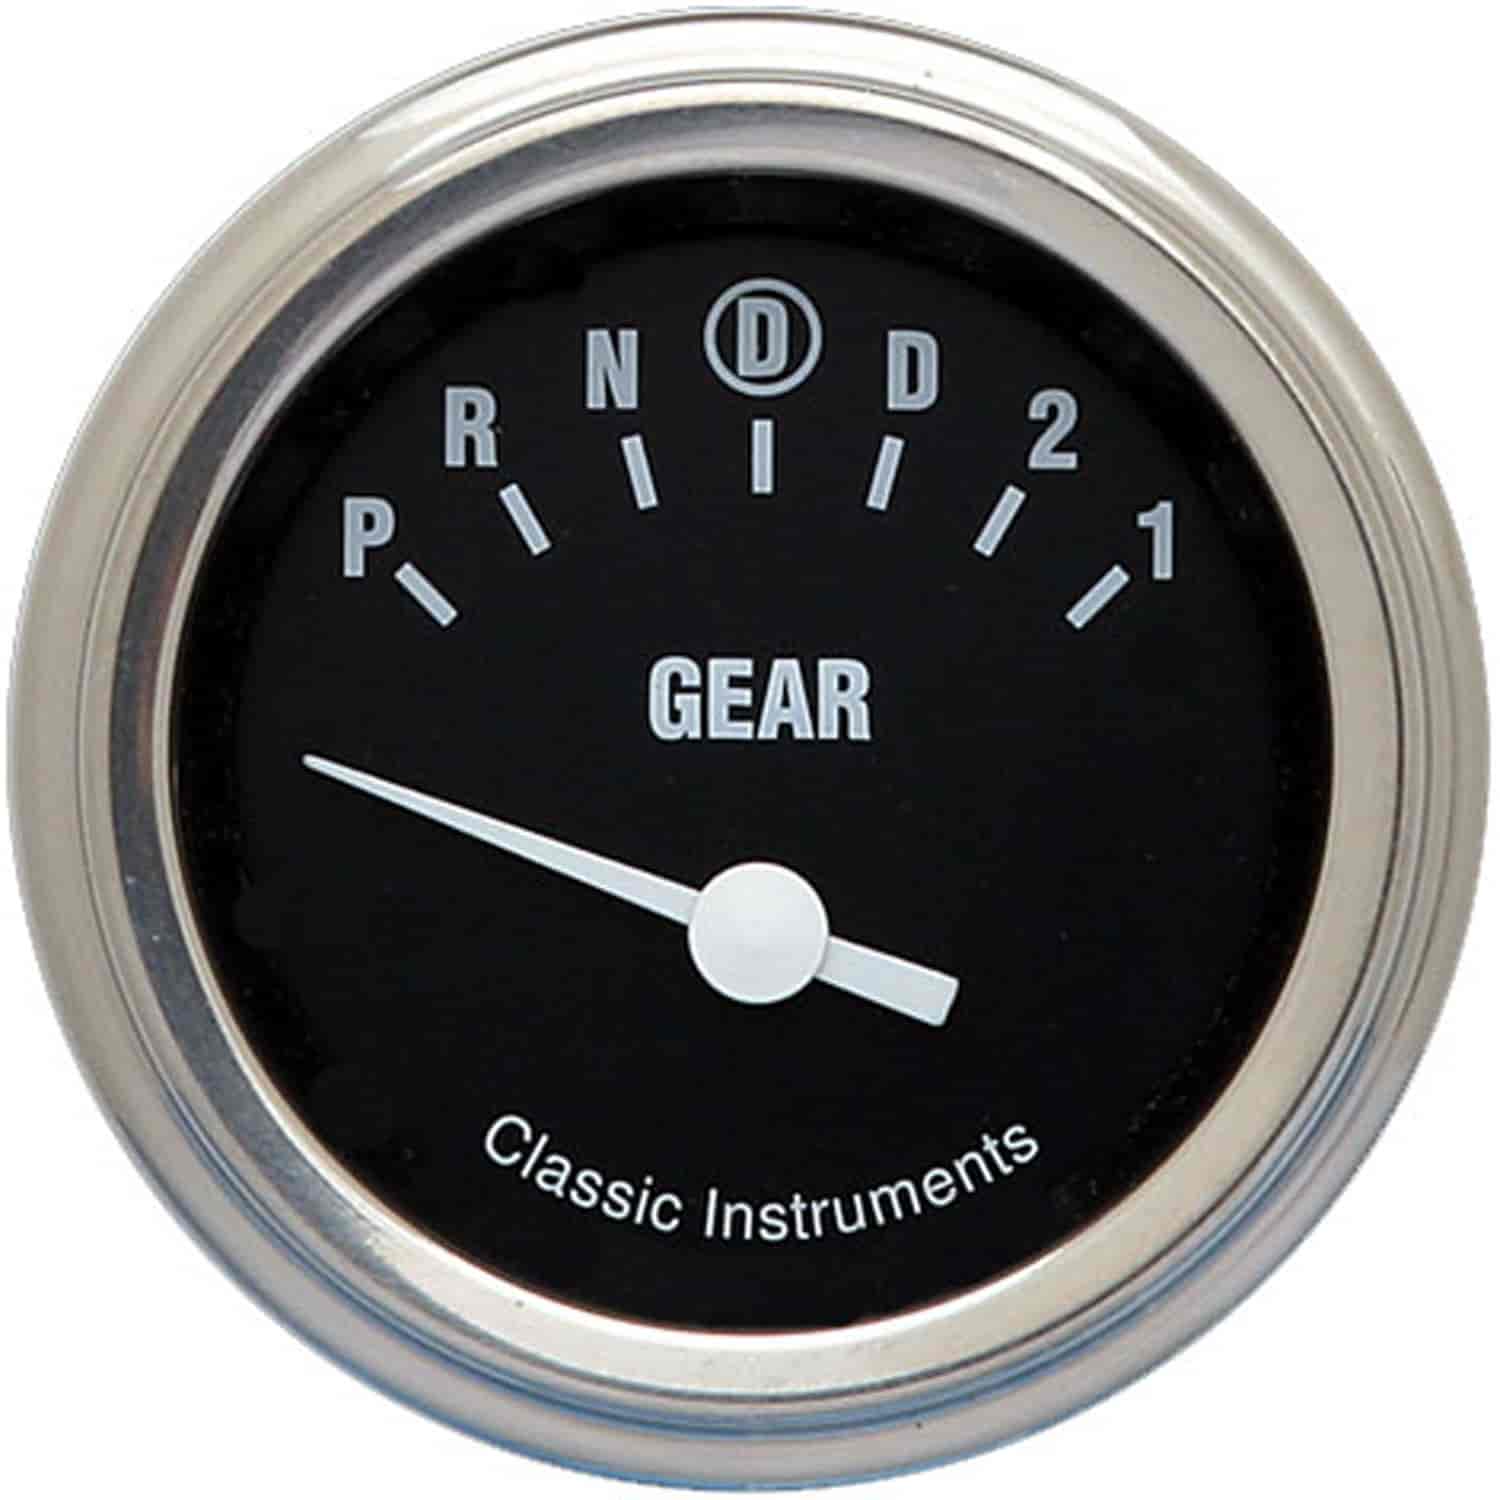 Hot Rod Series Gear Indicator 2-1/8" Electrical